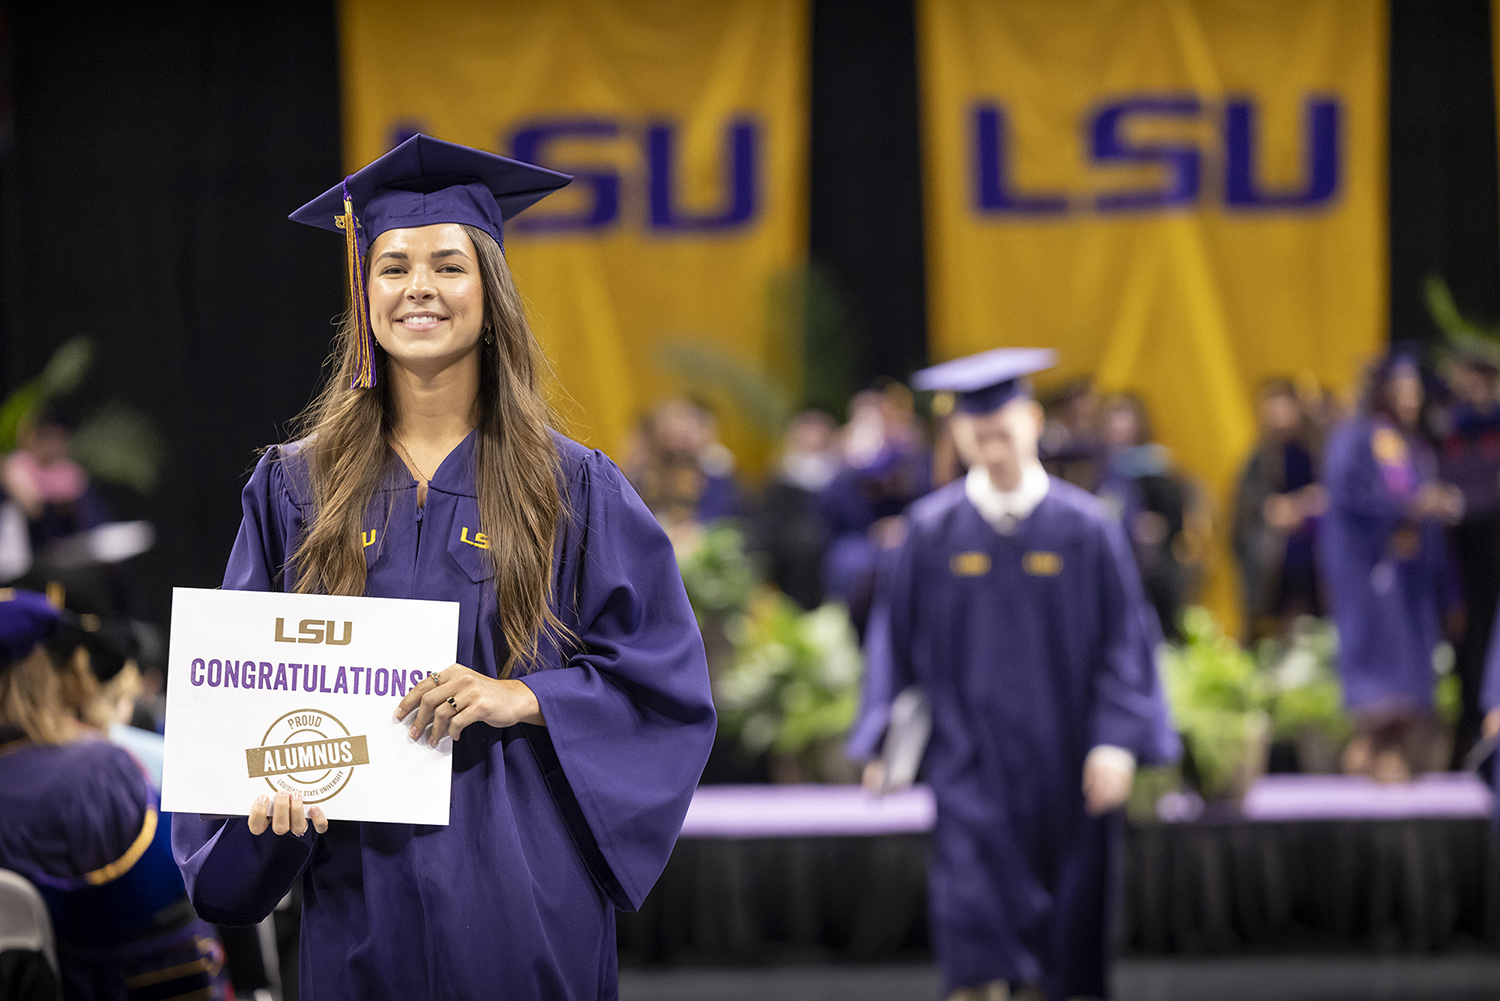 Student honored during commencement ceremony